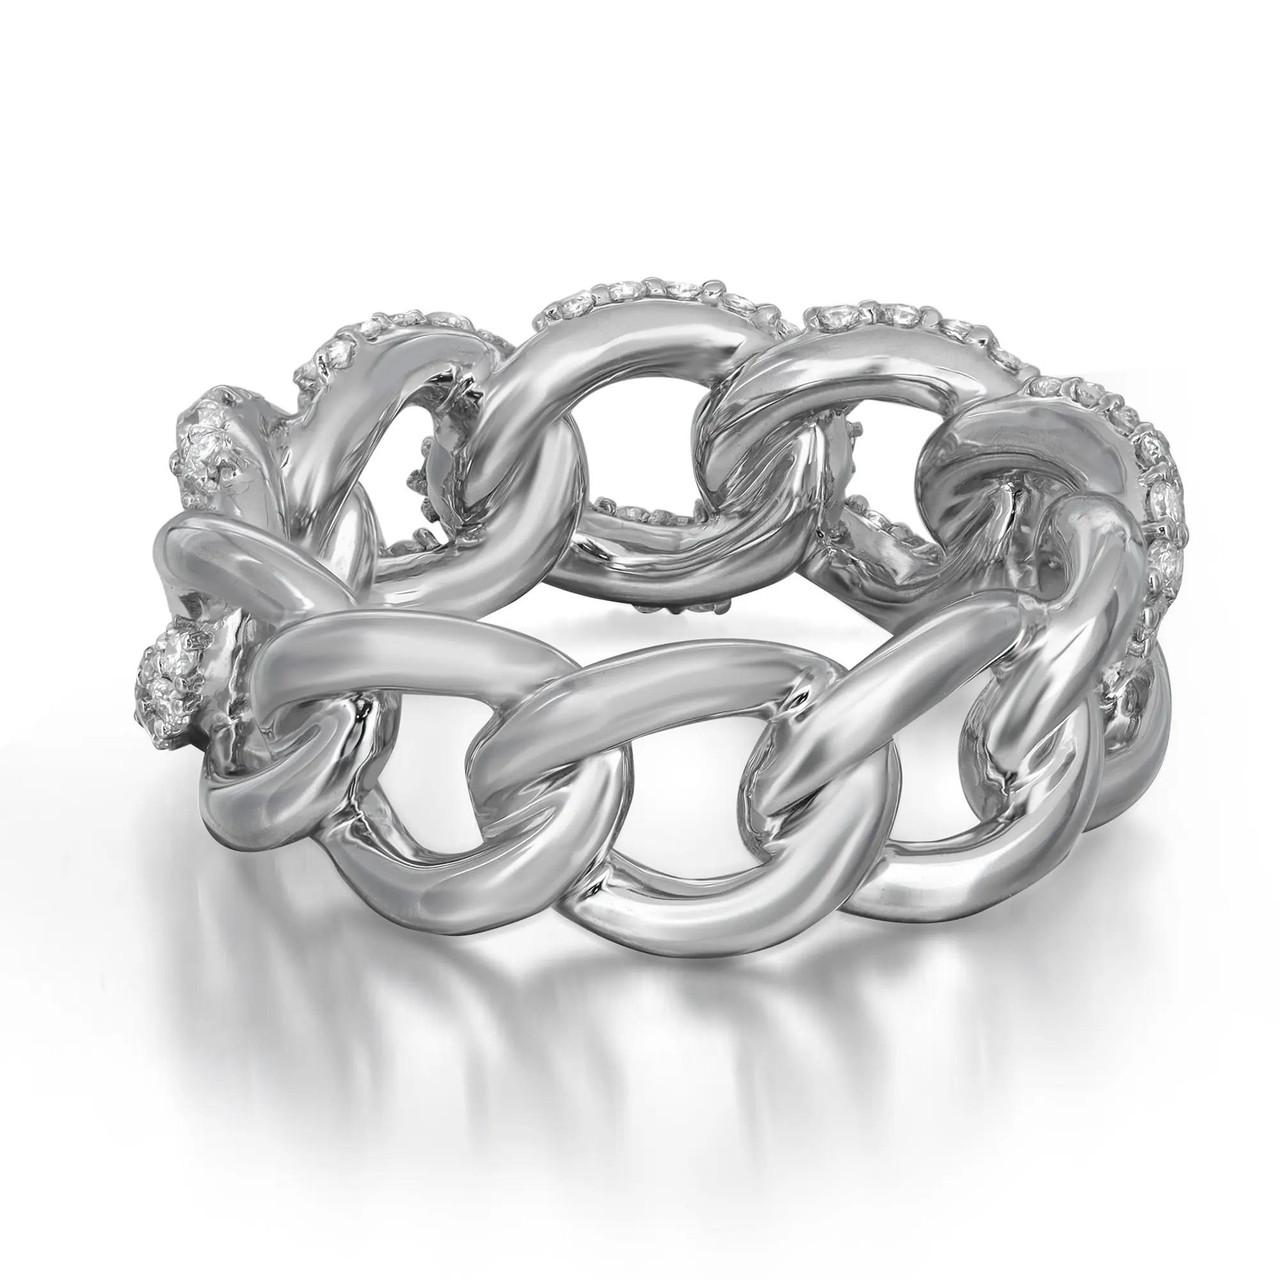 For Sale:  Elizabeth Fine Jewelry 1.00 Carat Diamond Chain Link Band Ring 18k White Gold 2